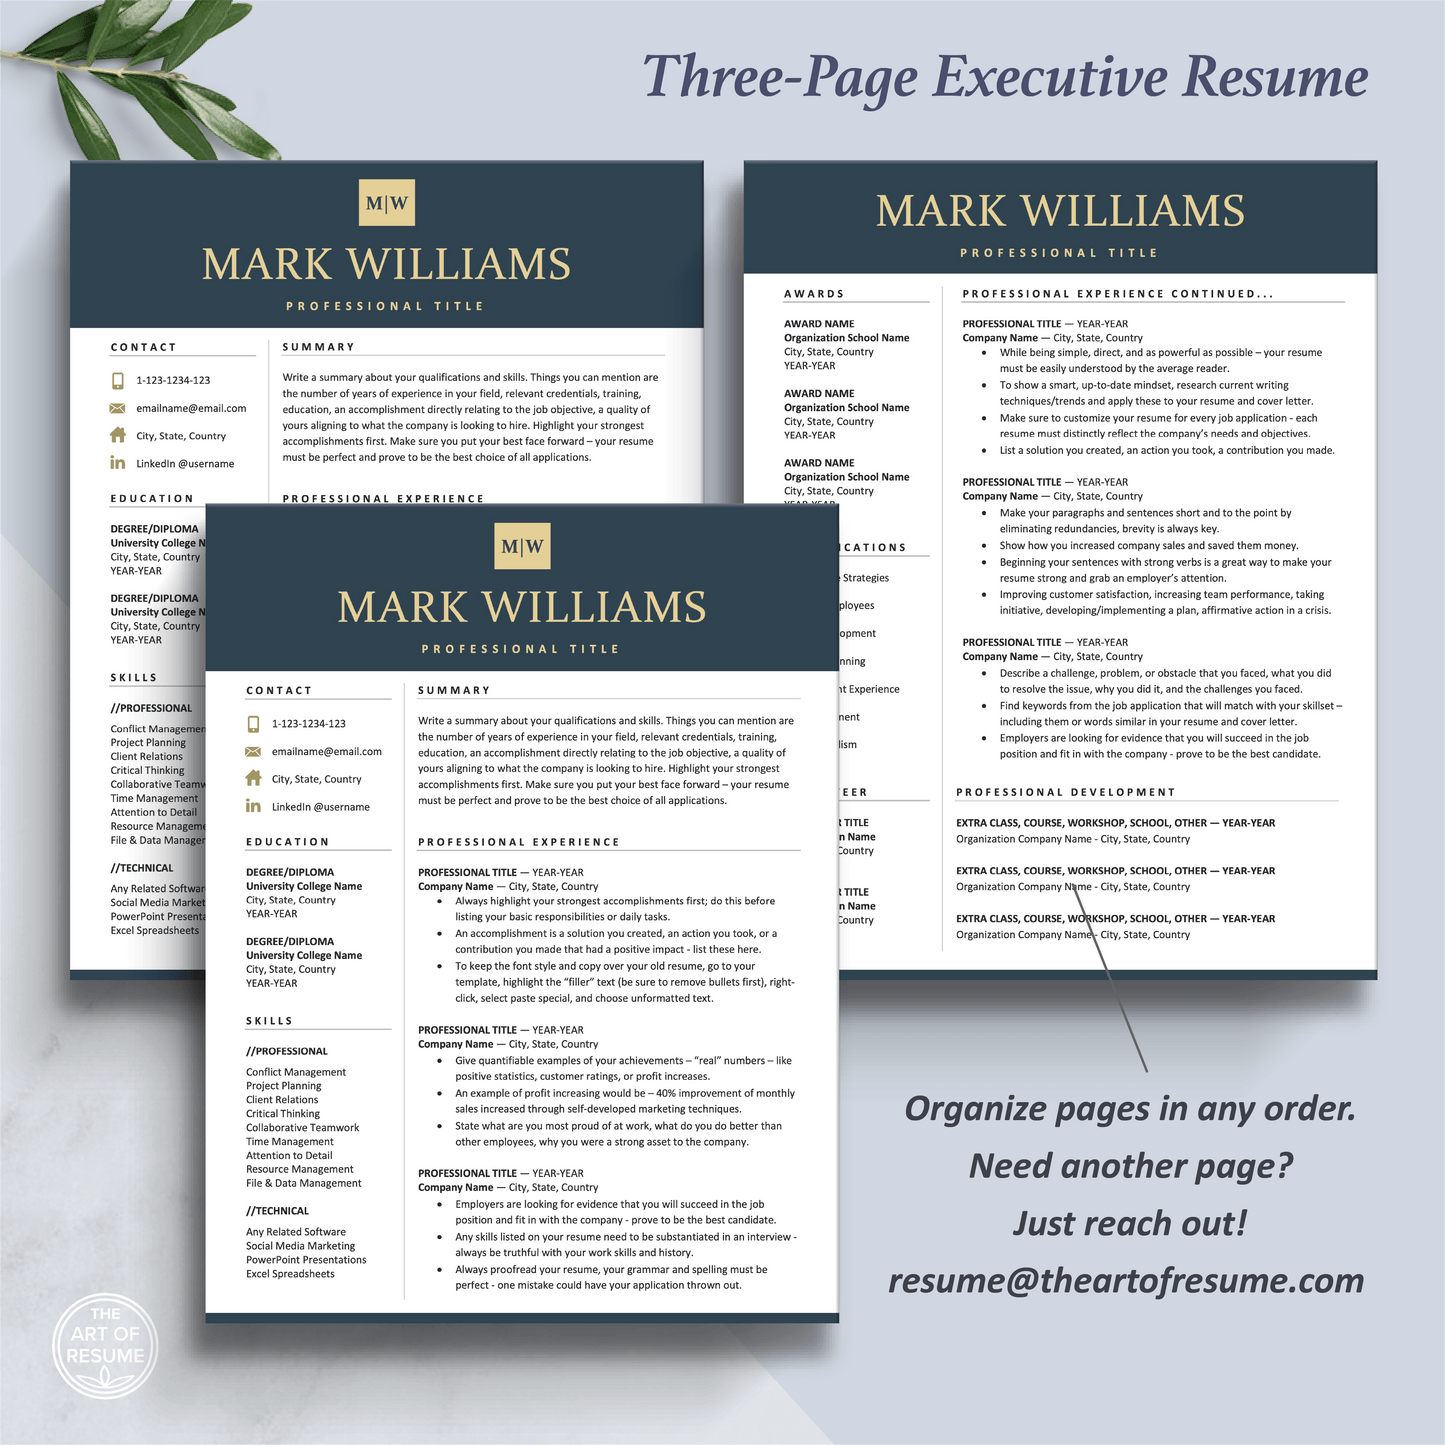 The Art of Resume Templates | Three-Page Executive CEO C-Suite Level  Navy Blue Resume CV Template Format | Curriculum Vitae